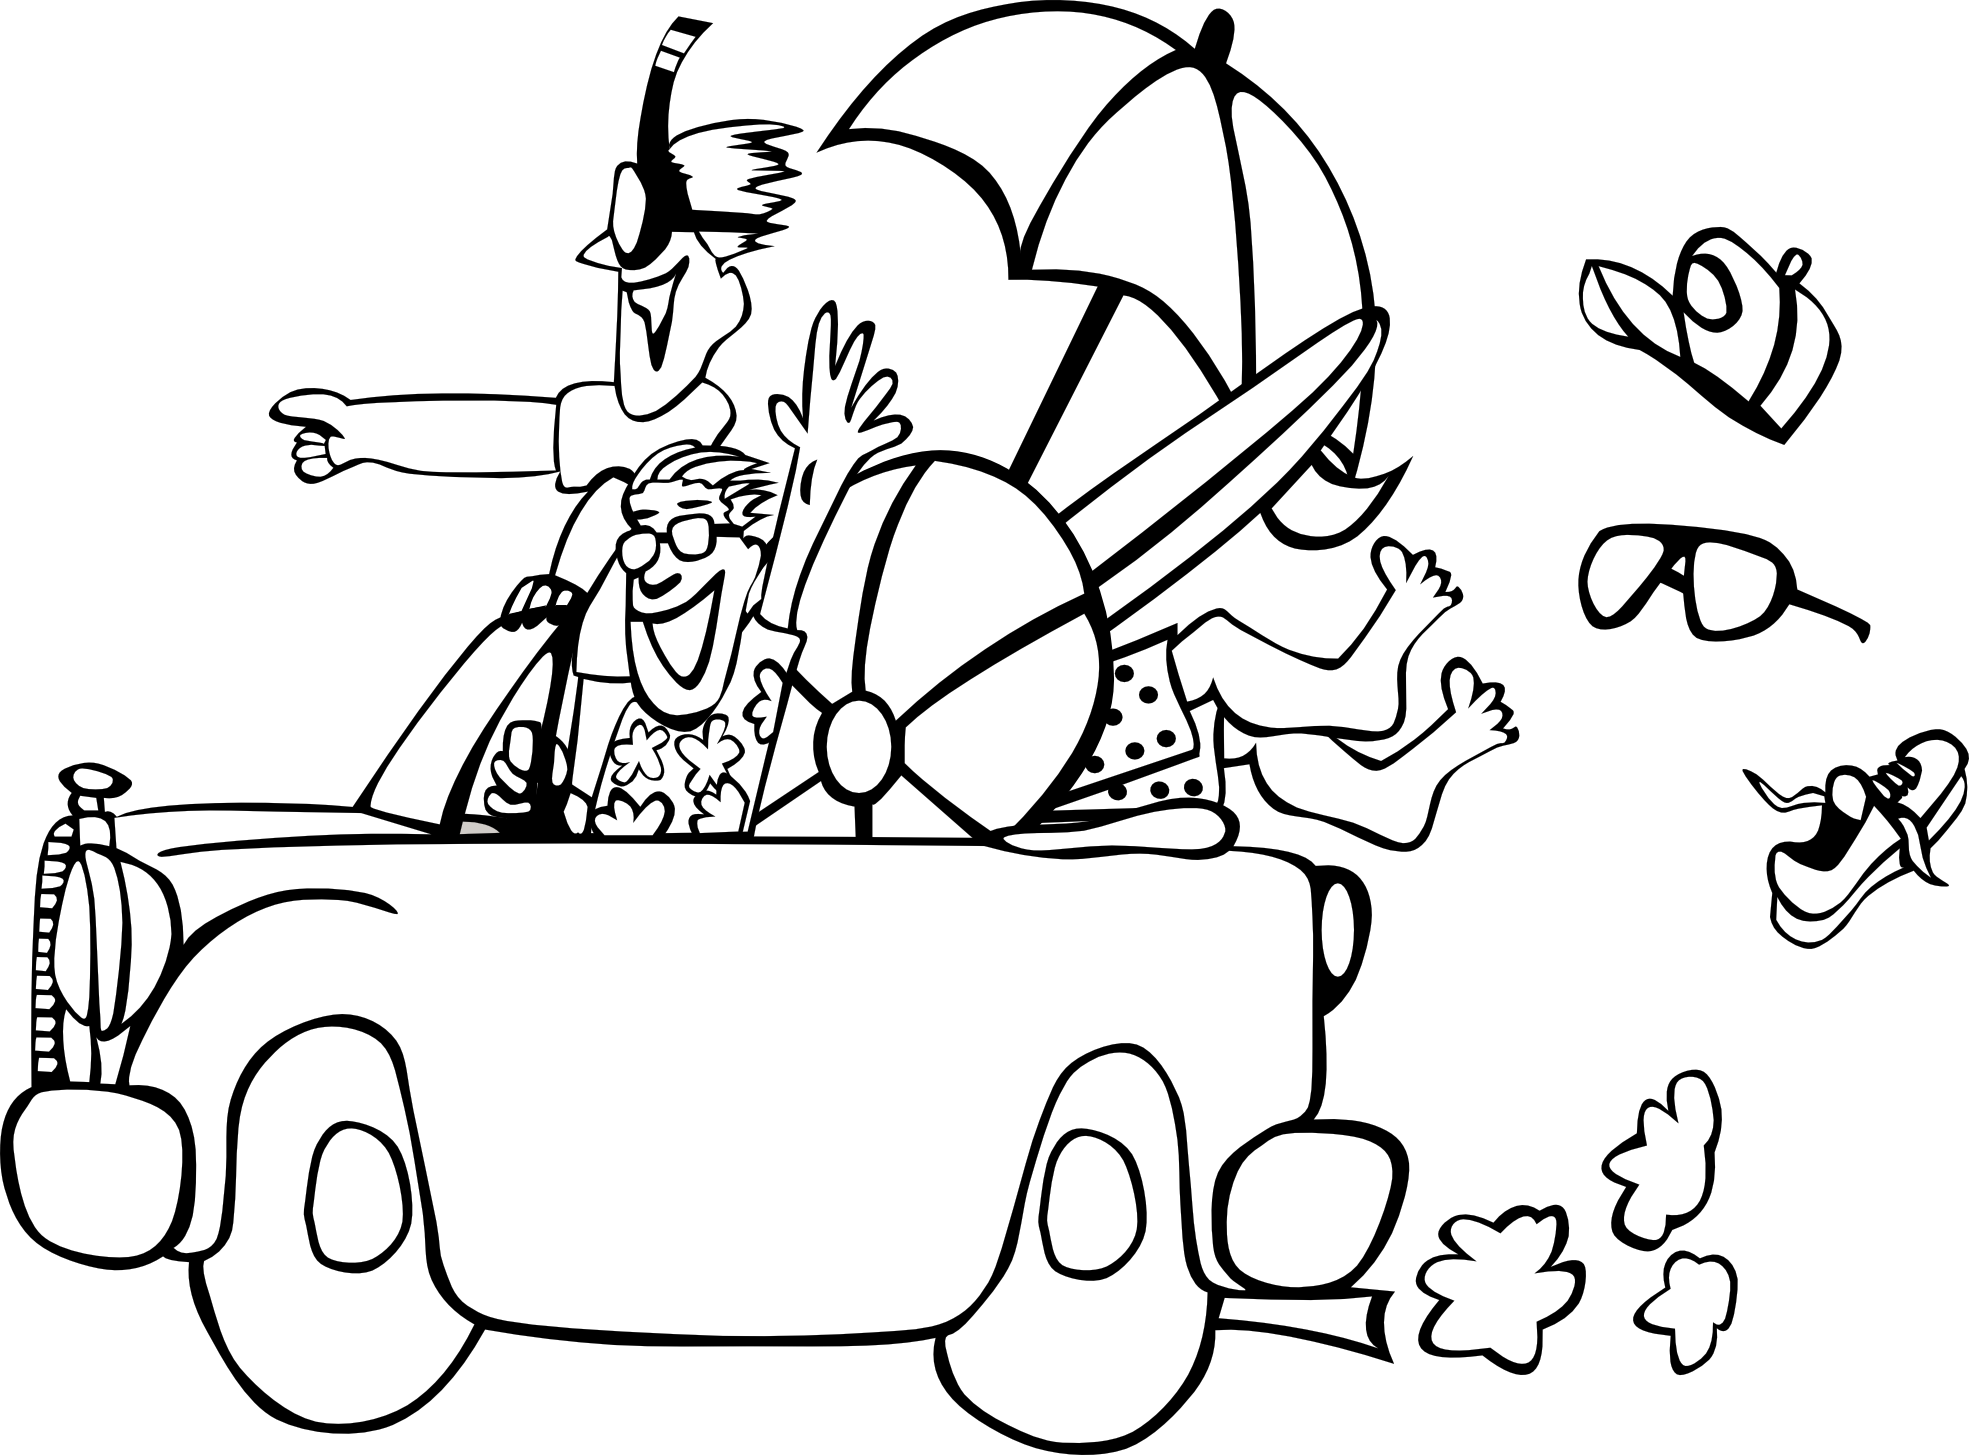 summer vacation clip art black and white